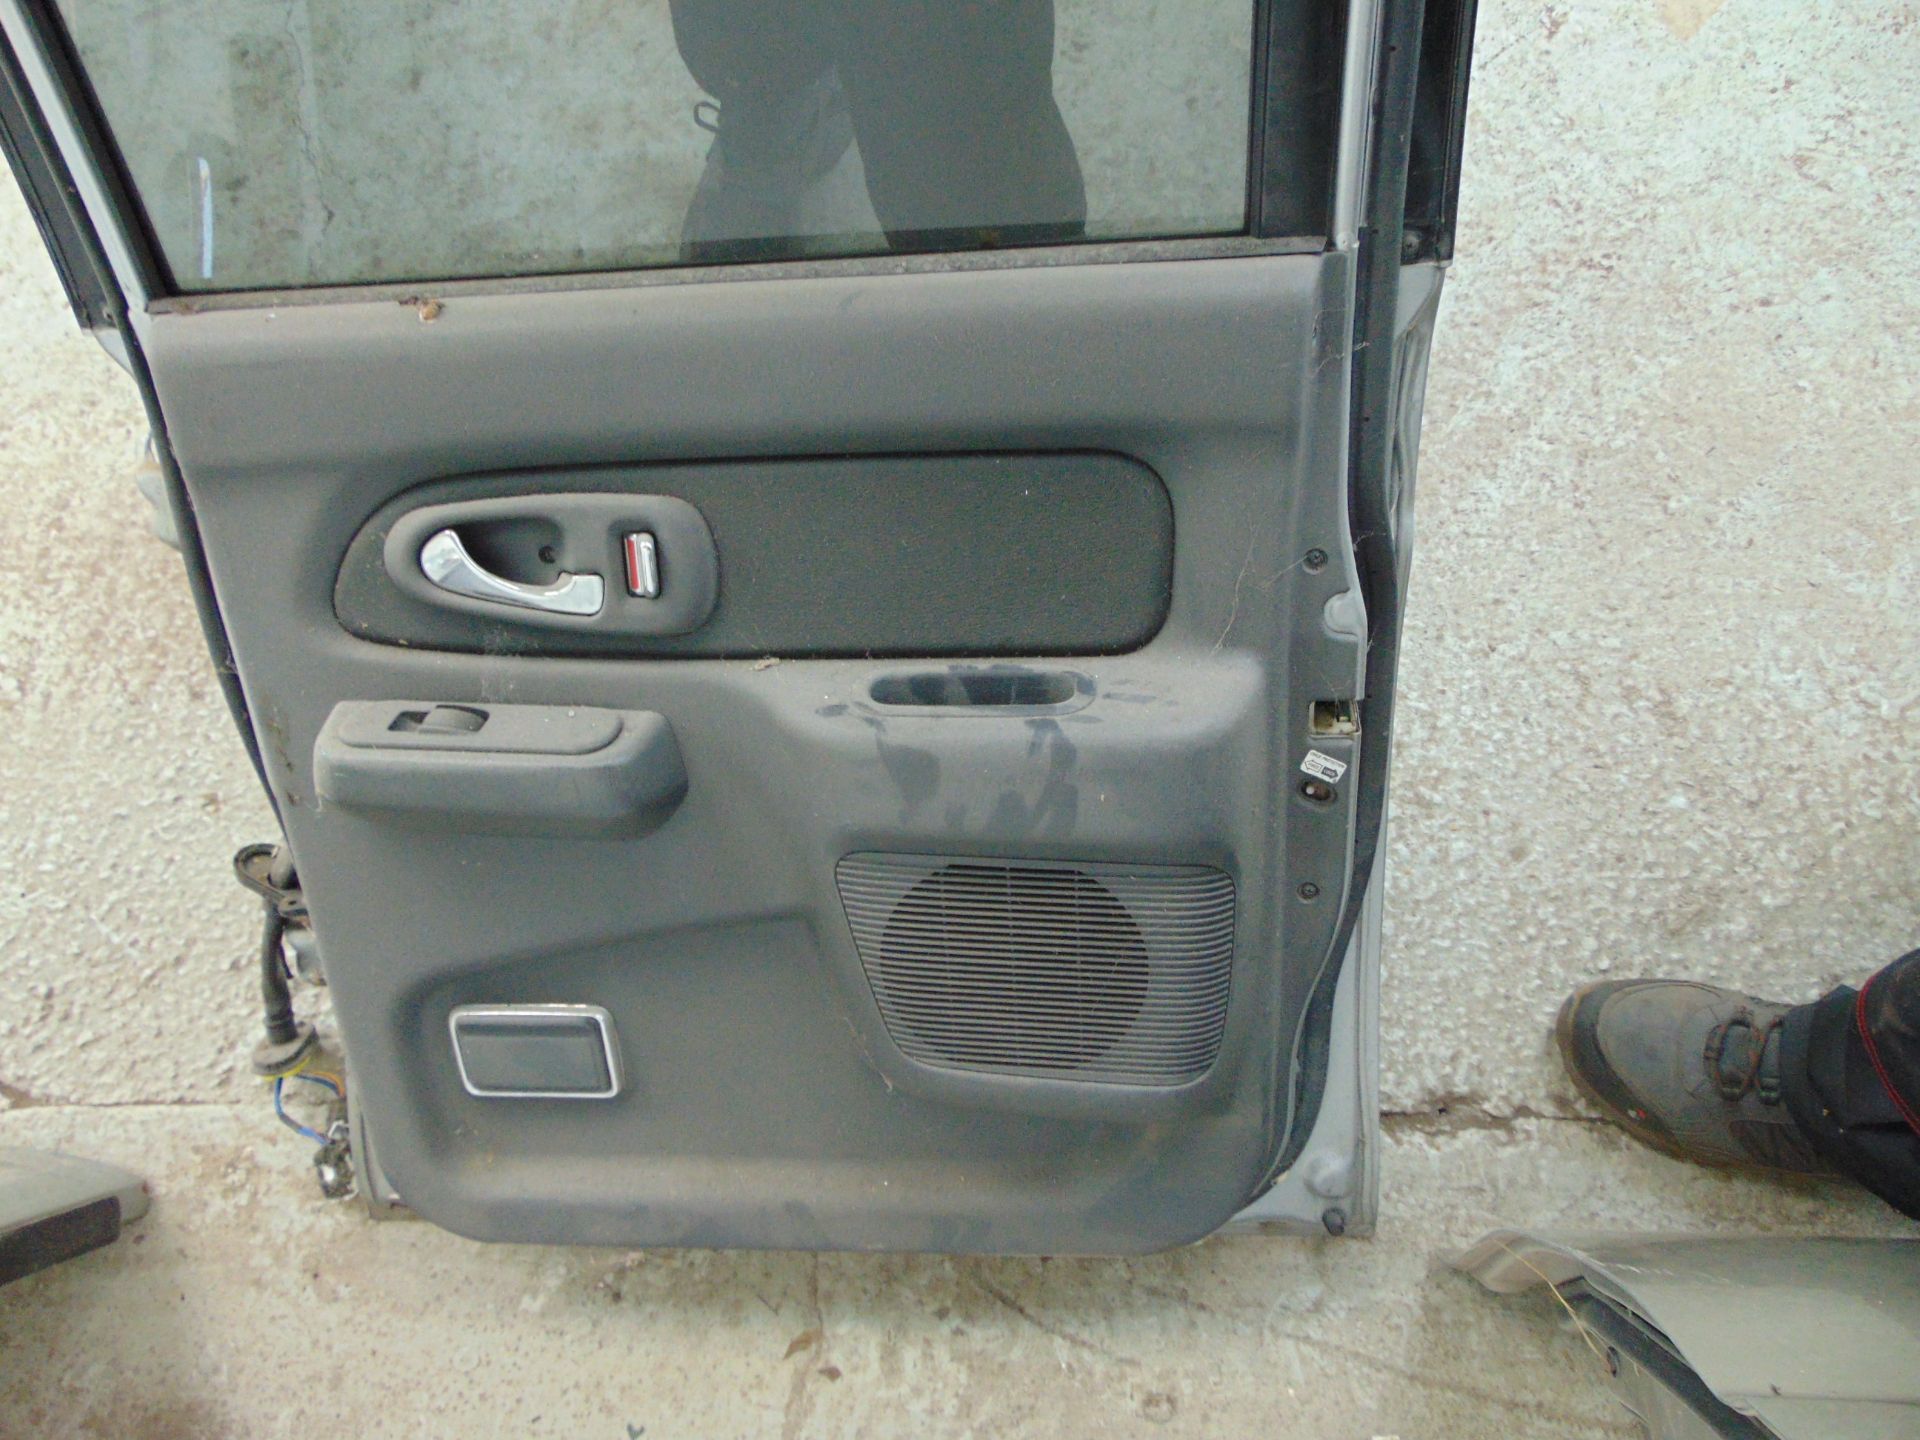 L200 warrior doors in silver o/s front o/s rear n/s front n/s rear and tailgate - Image 12 of 12